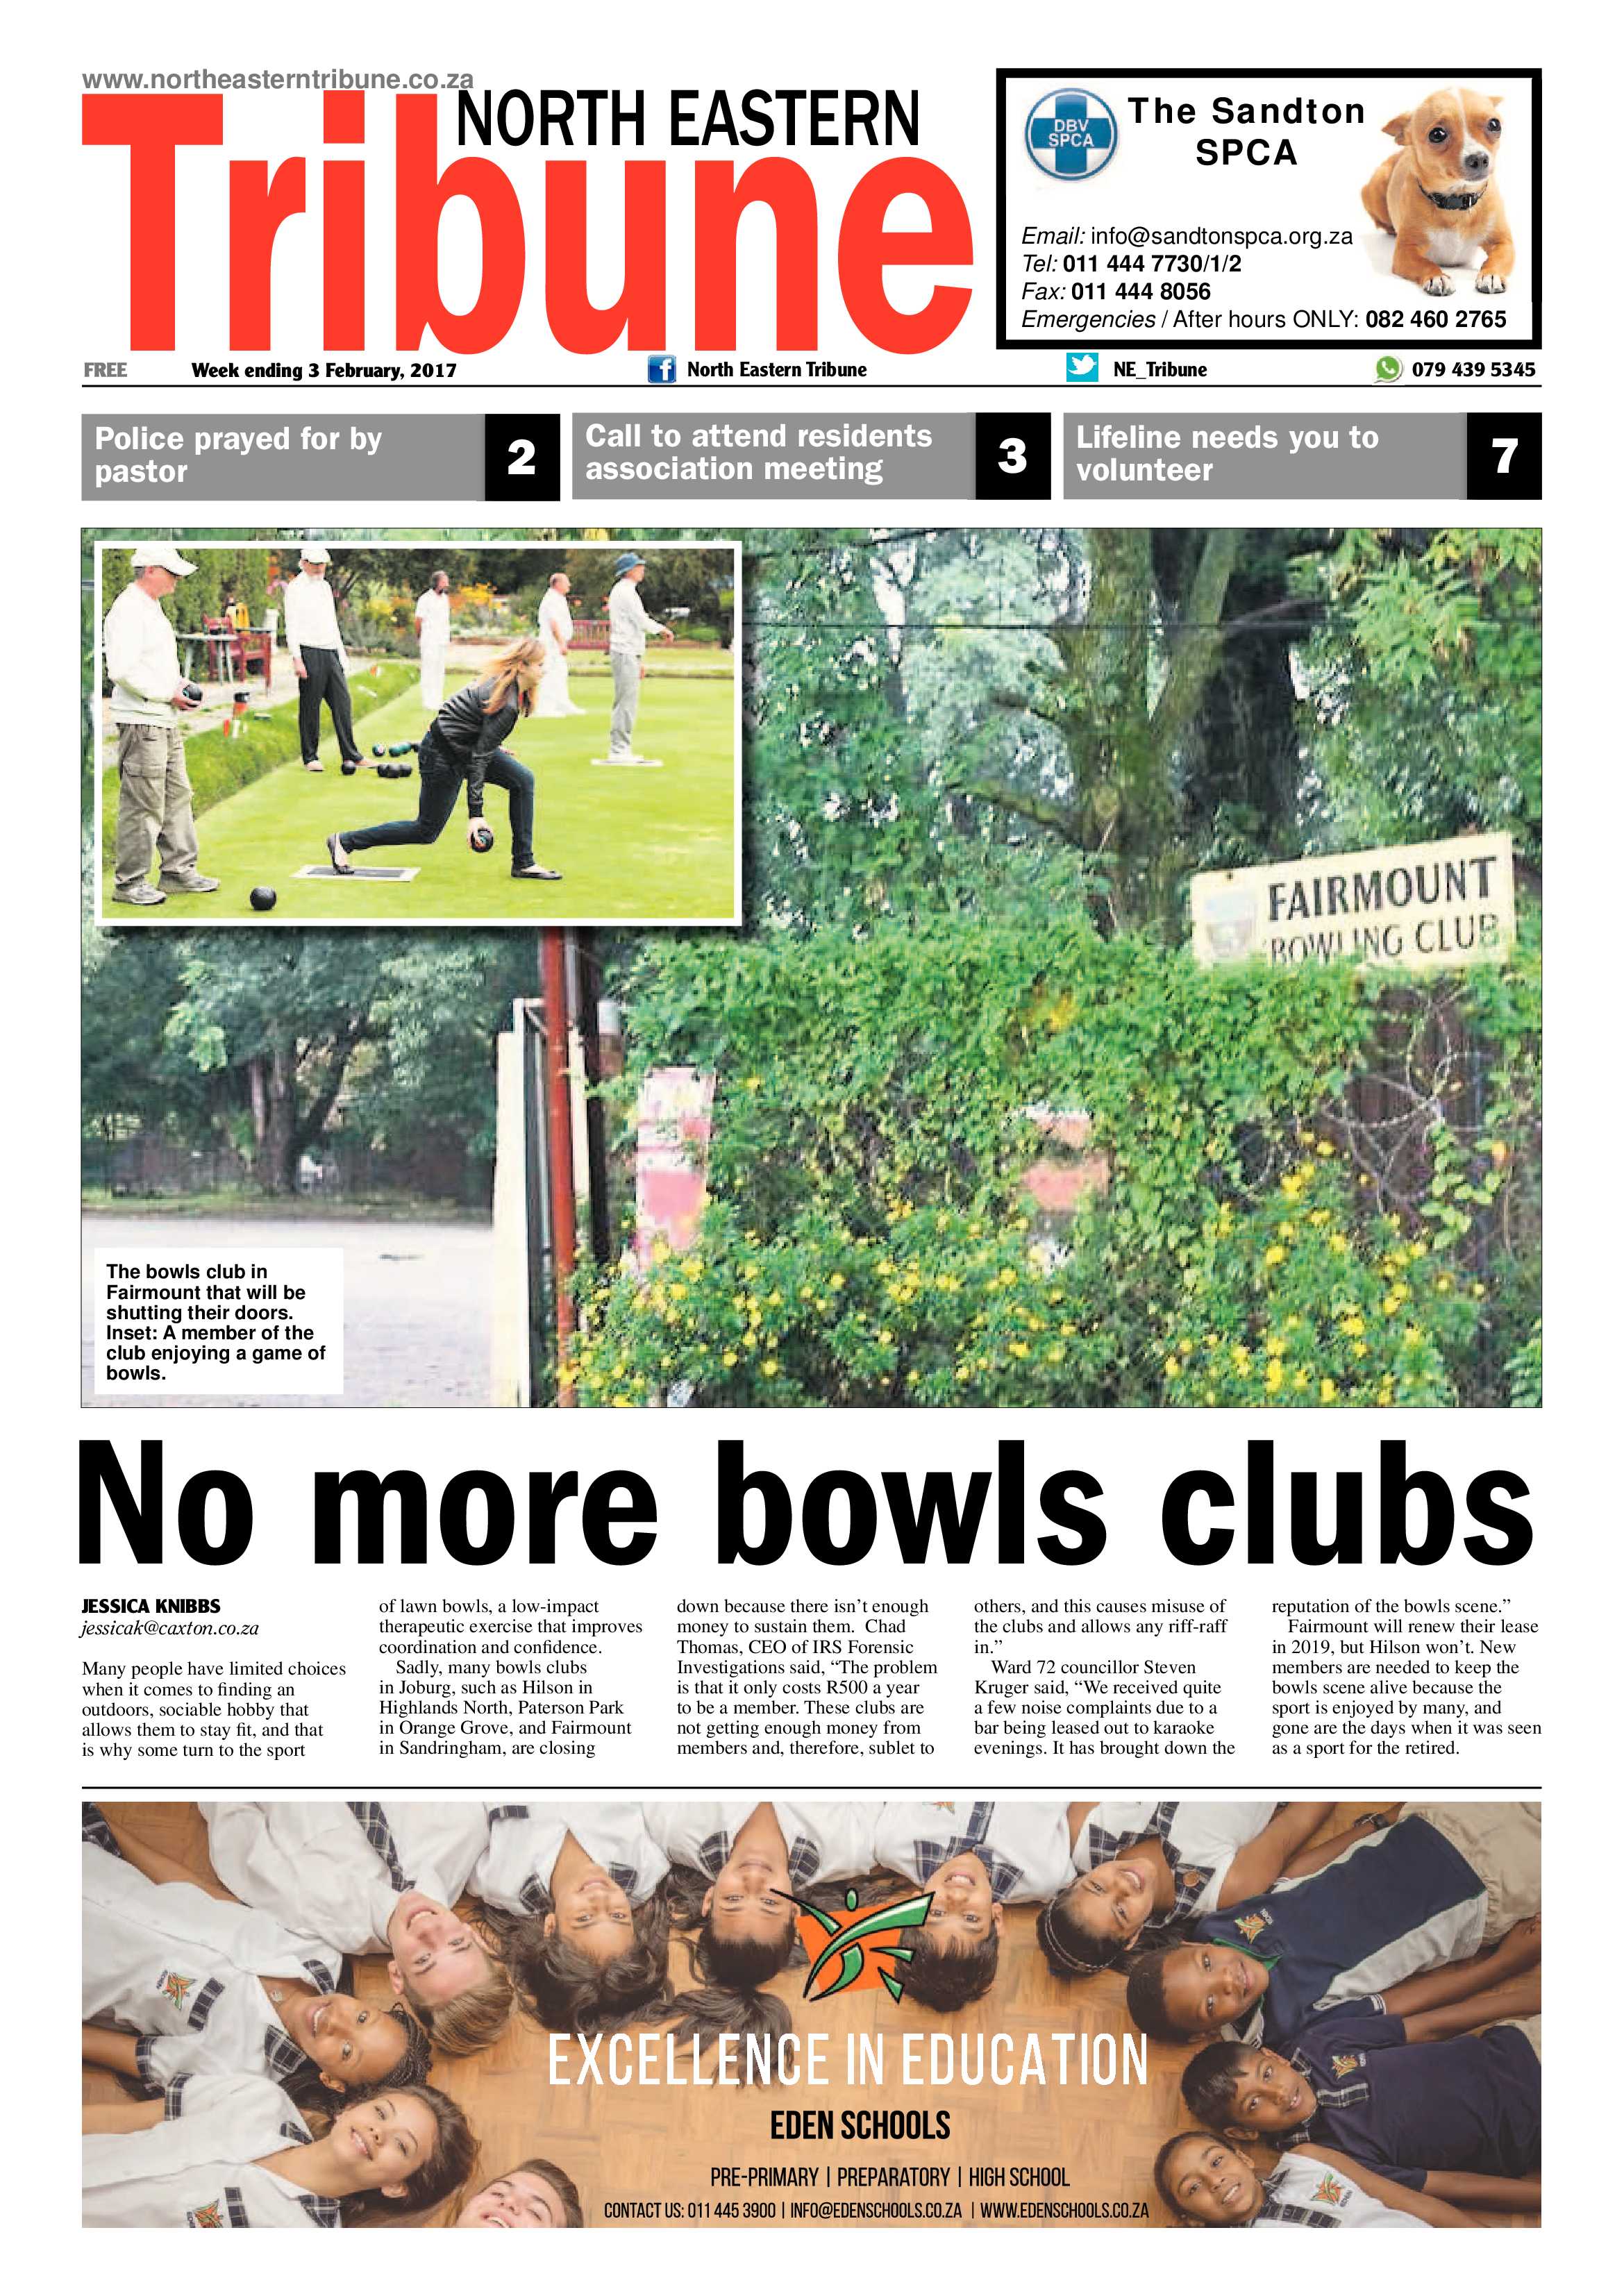 North Eastern Tribune 3 February, 2017 page 1